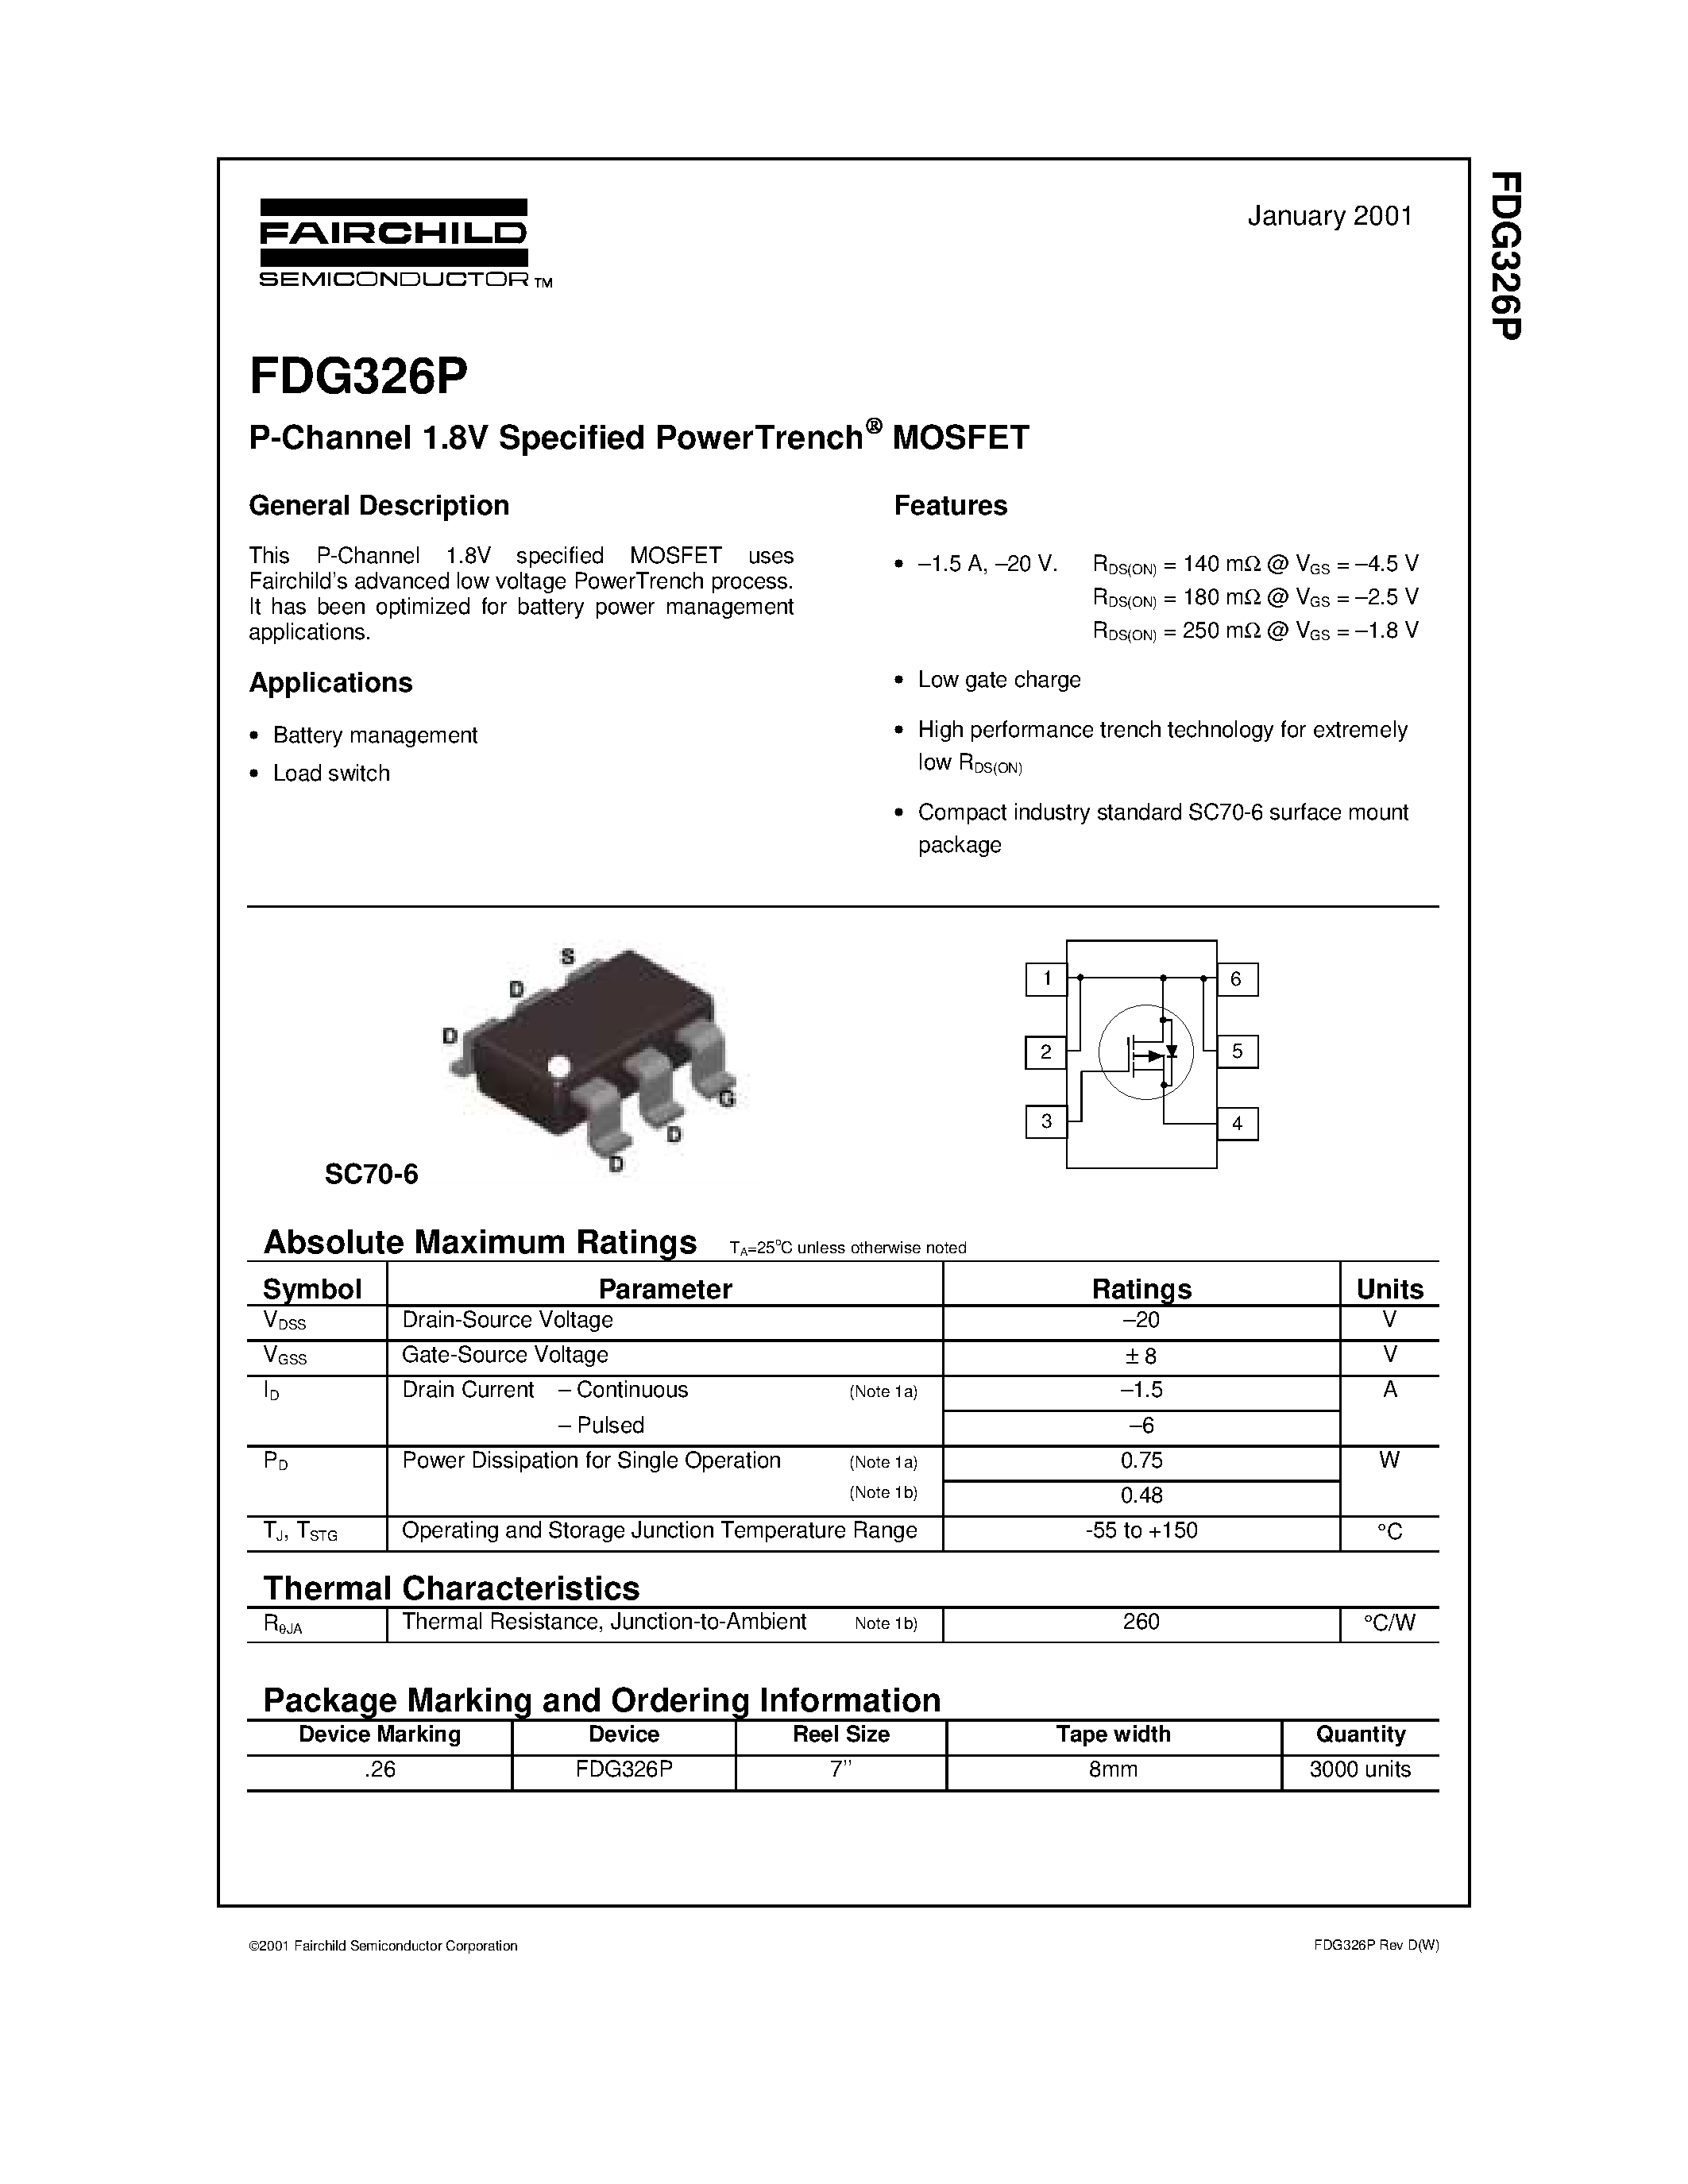 Даташит FDG326P - P-Channel 1.8V Specified PowerTrench MOSFET страница 1